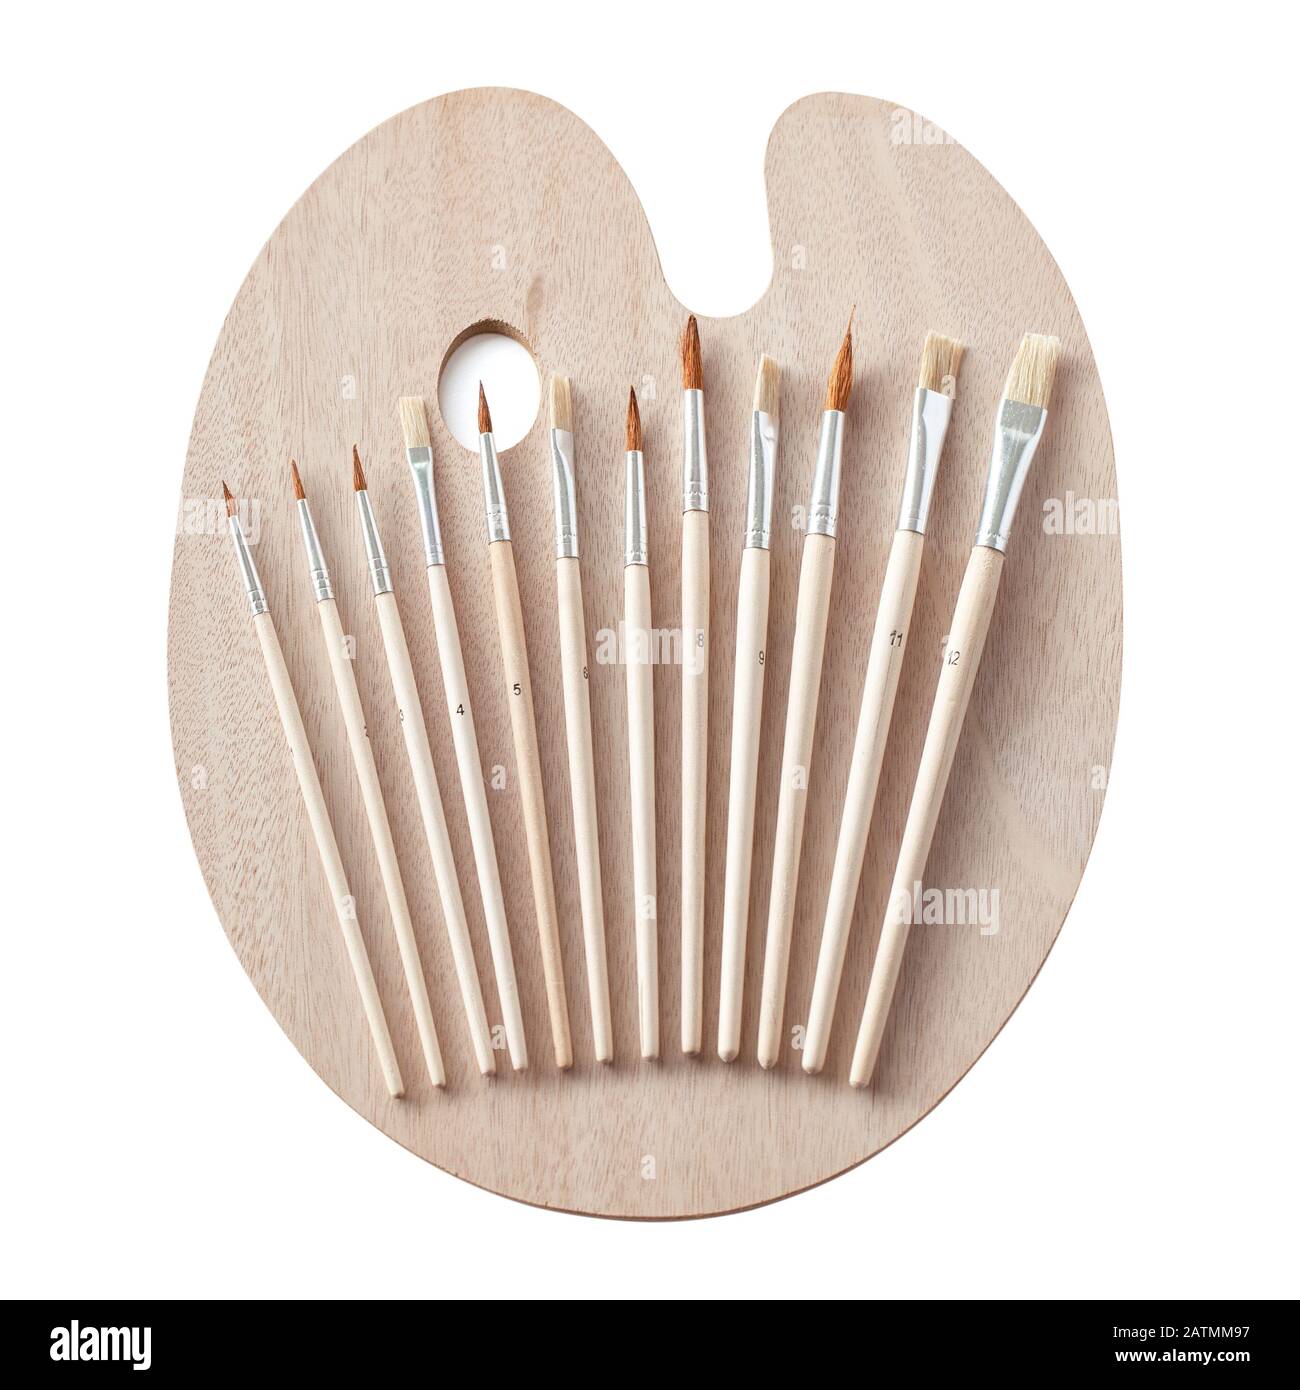 Brand new wooden painting art palette with a set of paint brushes isolated on white Stock Photo